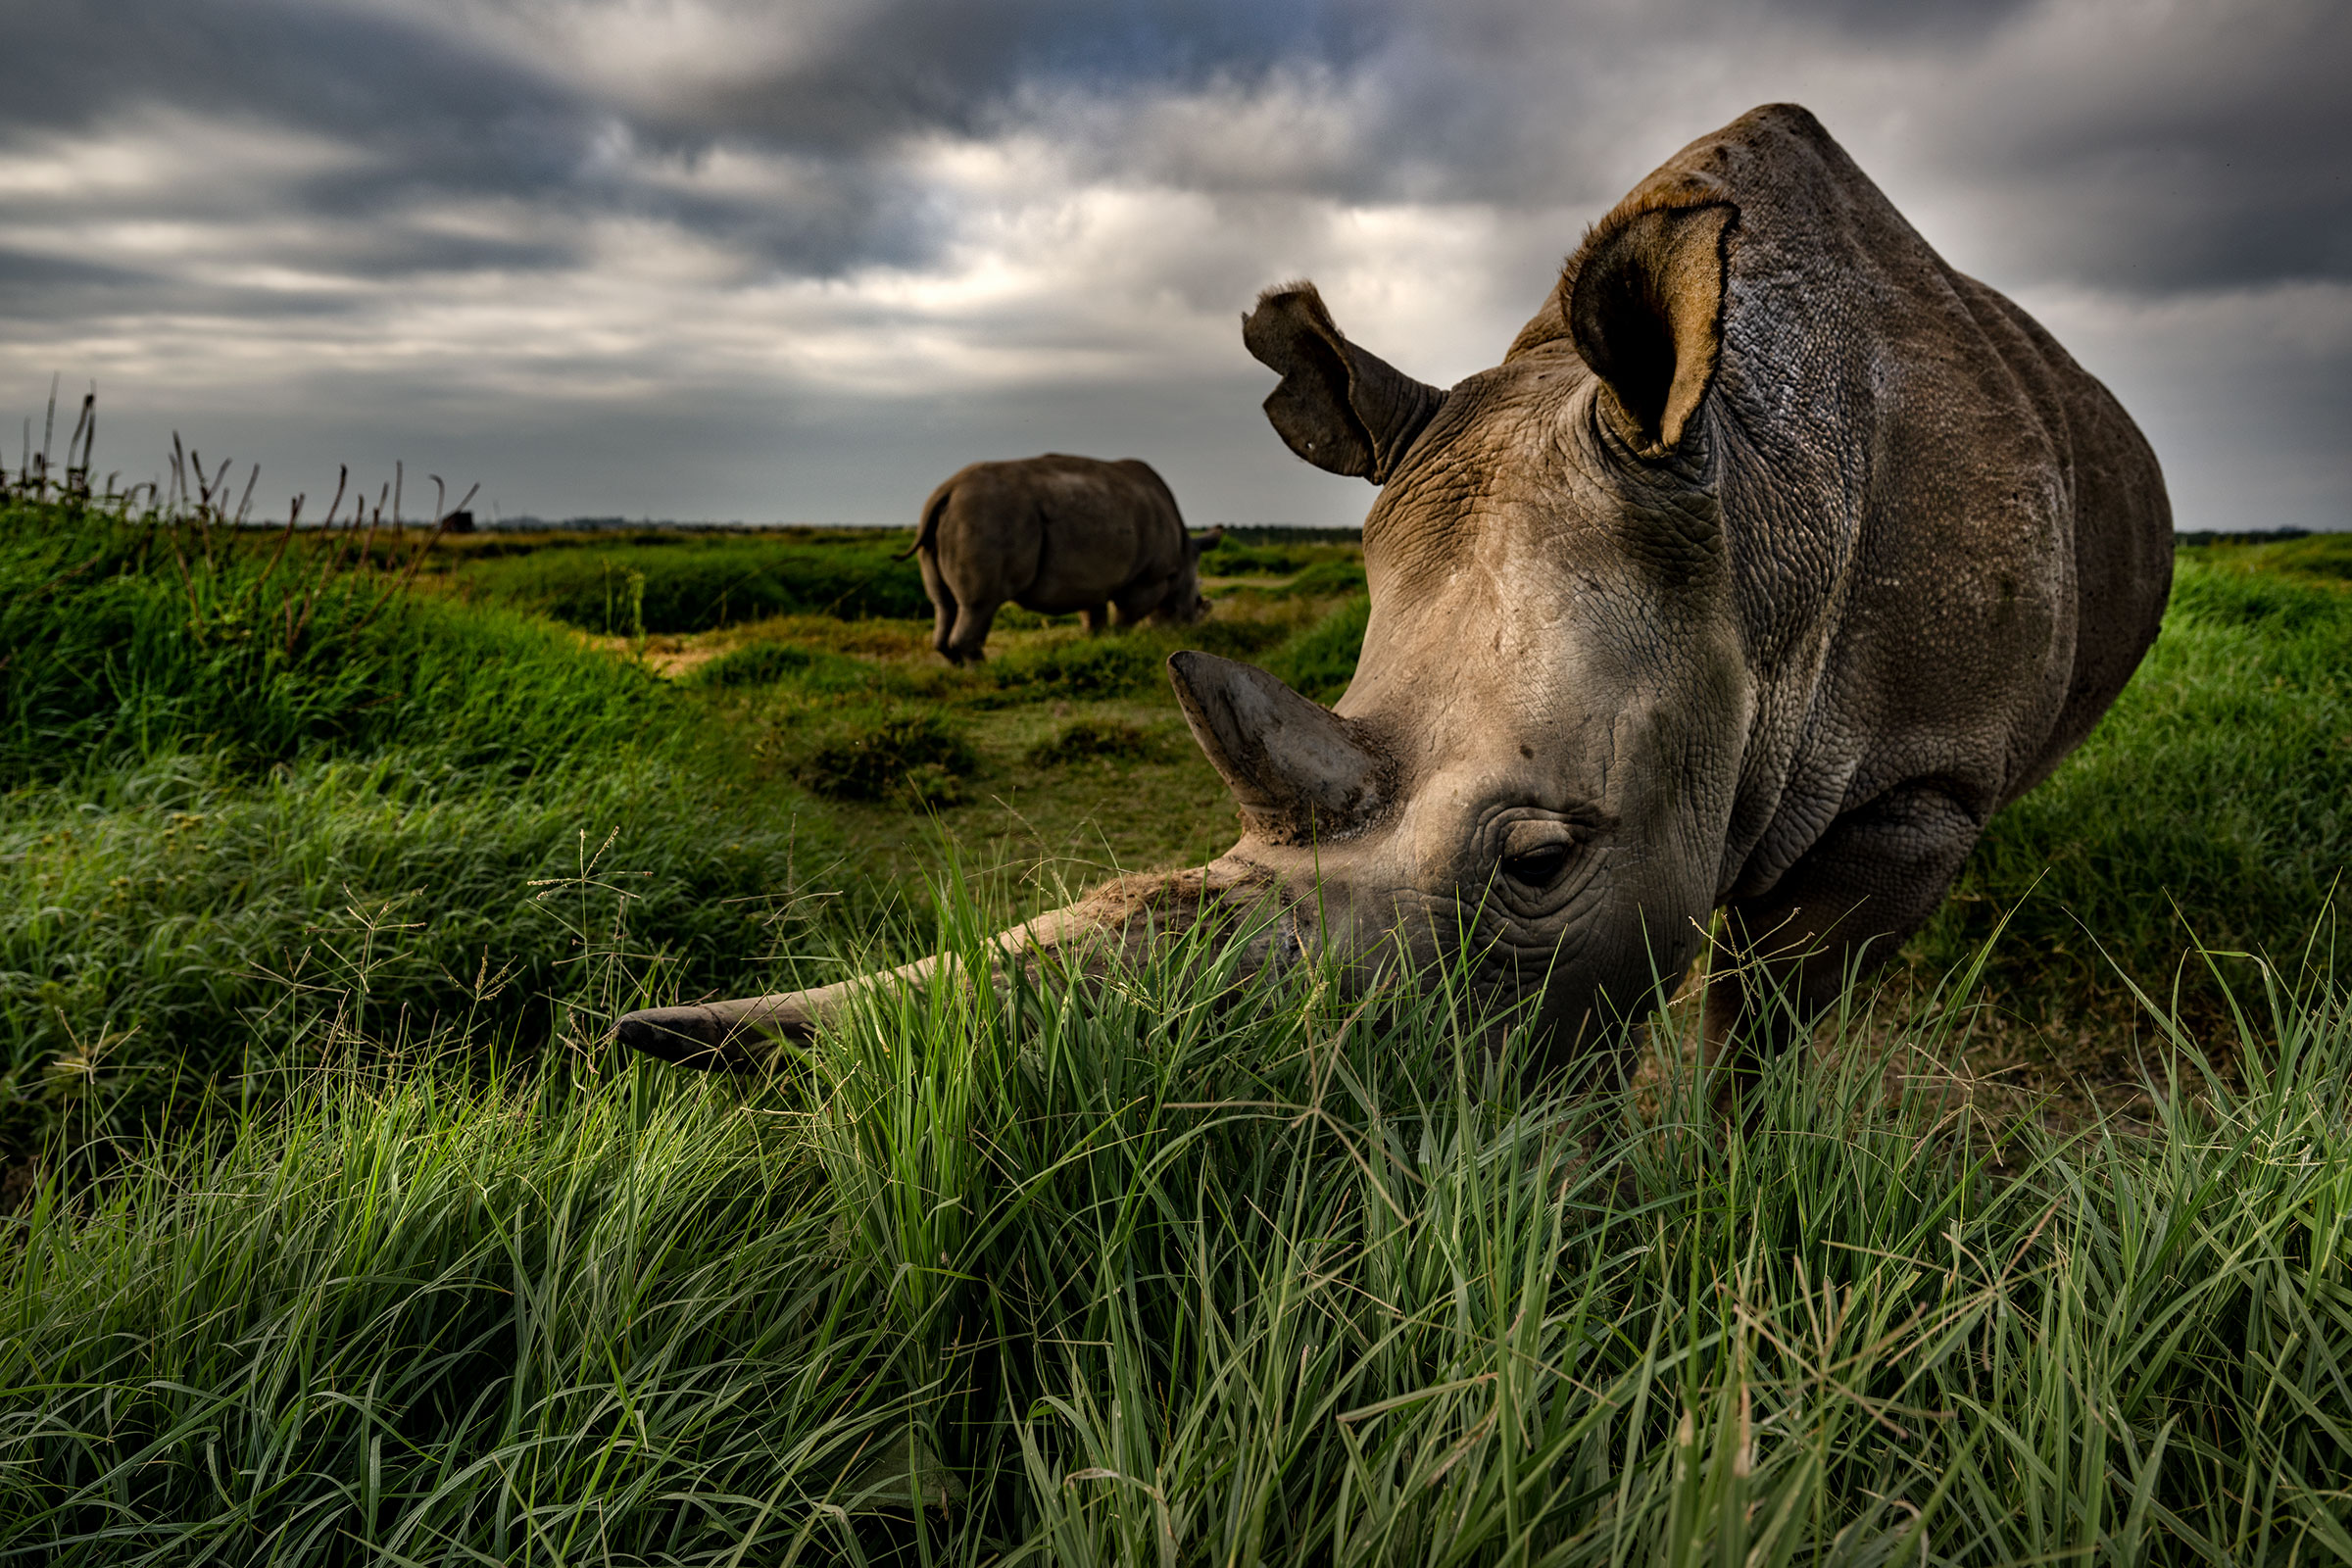 An Inside Look at the Embryo Transplant That May Help Save the Northern White Rhino